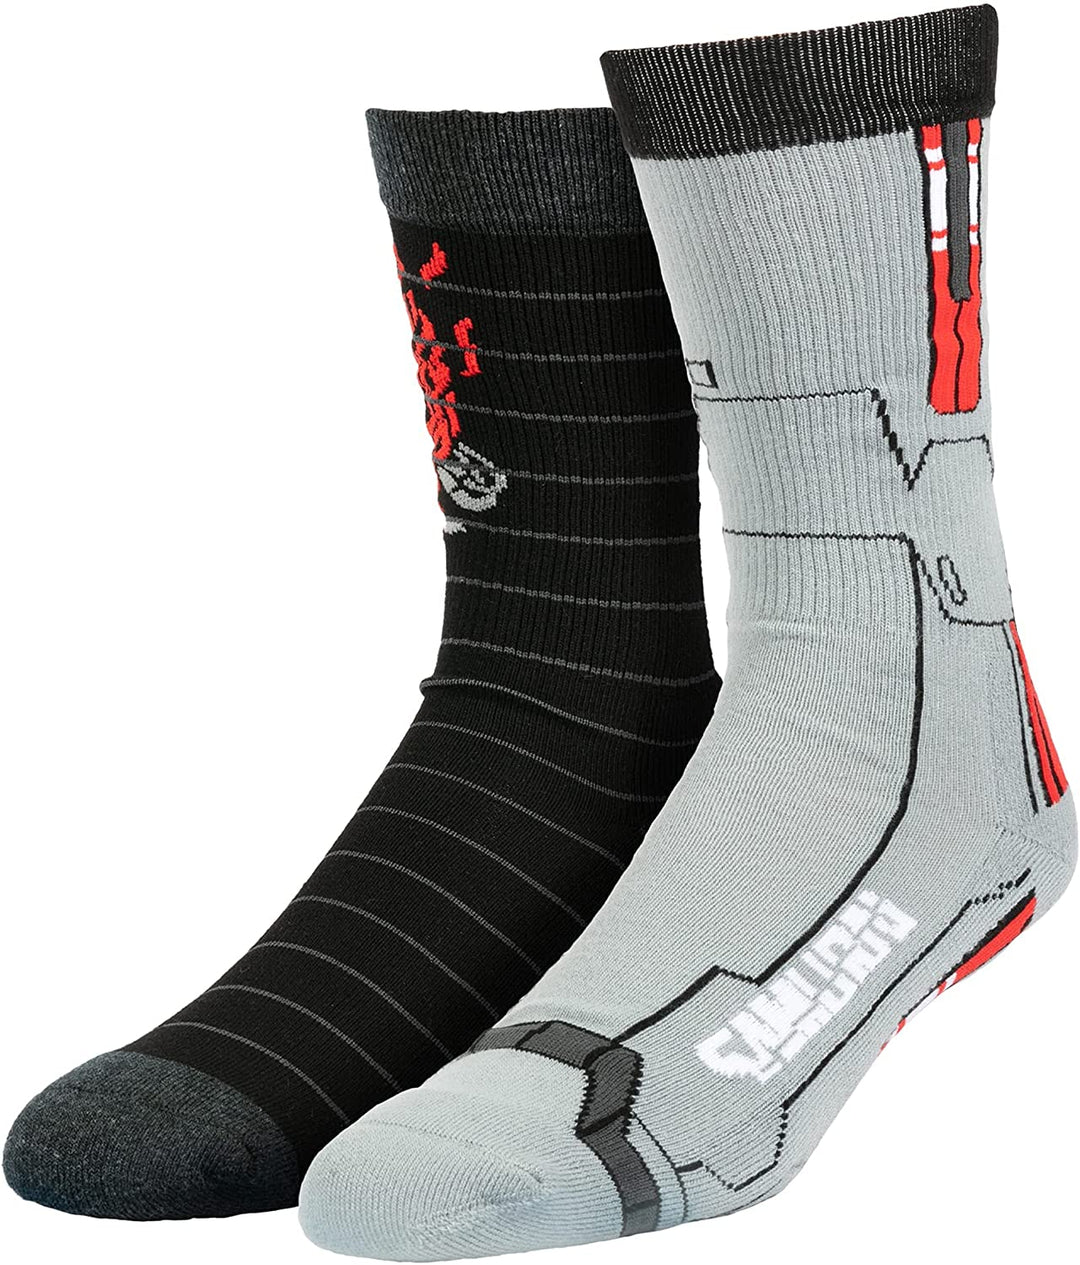 JINX Cyberpunk 2077 Johnny Silverfoot Embroidered Athletic Crew Socks, Multi-Col